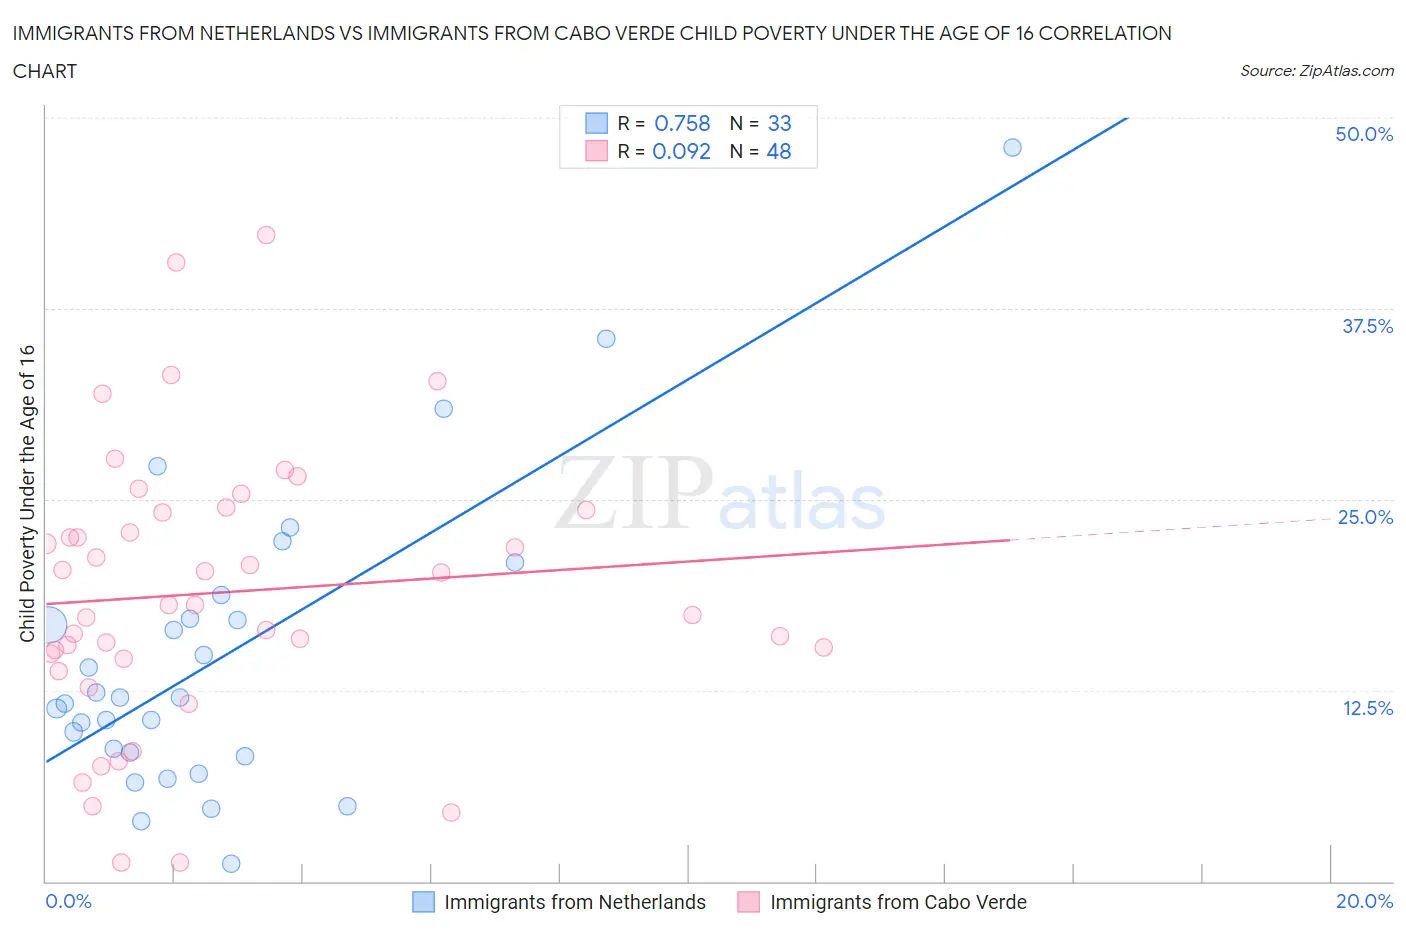 Immigrants from Netherlands vs Immigrants from Cabo Verde Child Poverty Under the Age of 16